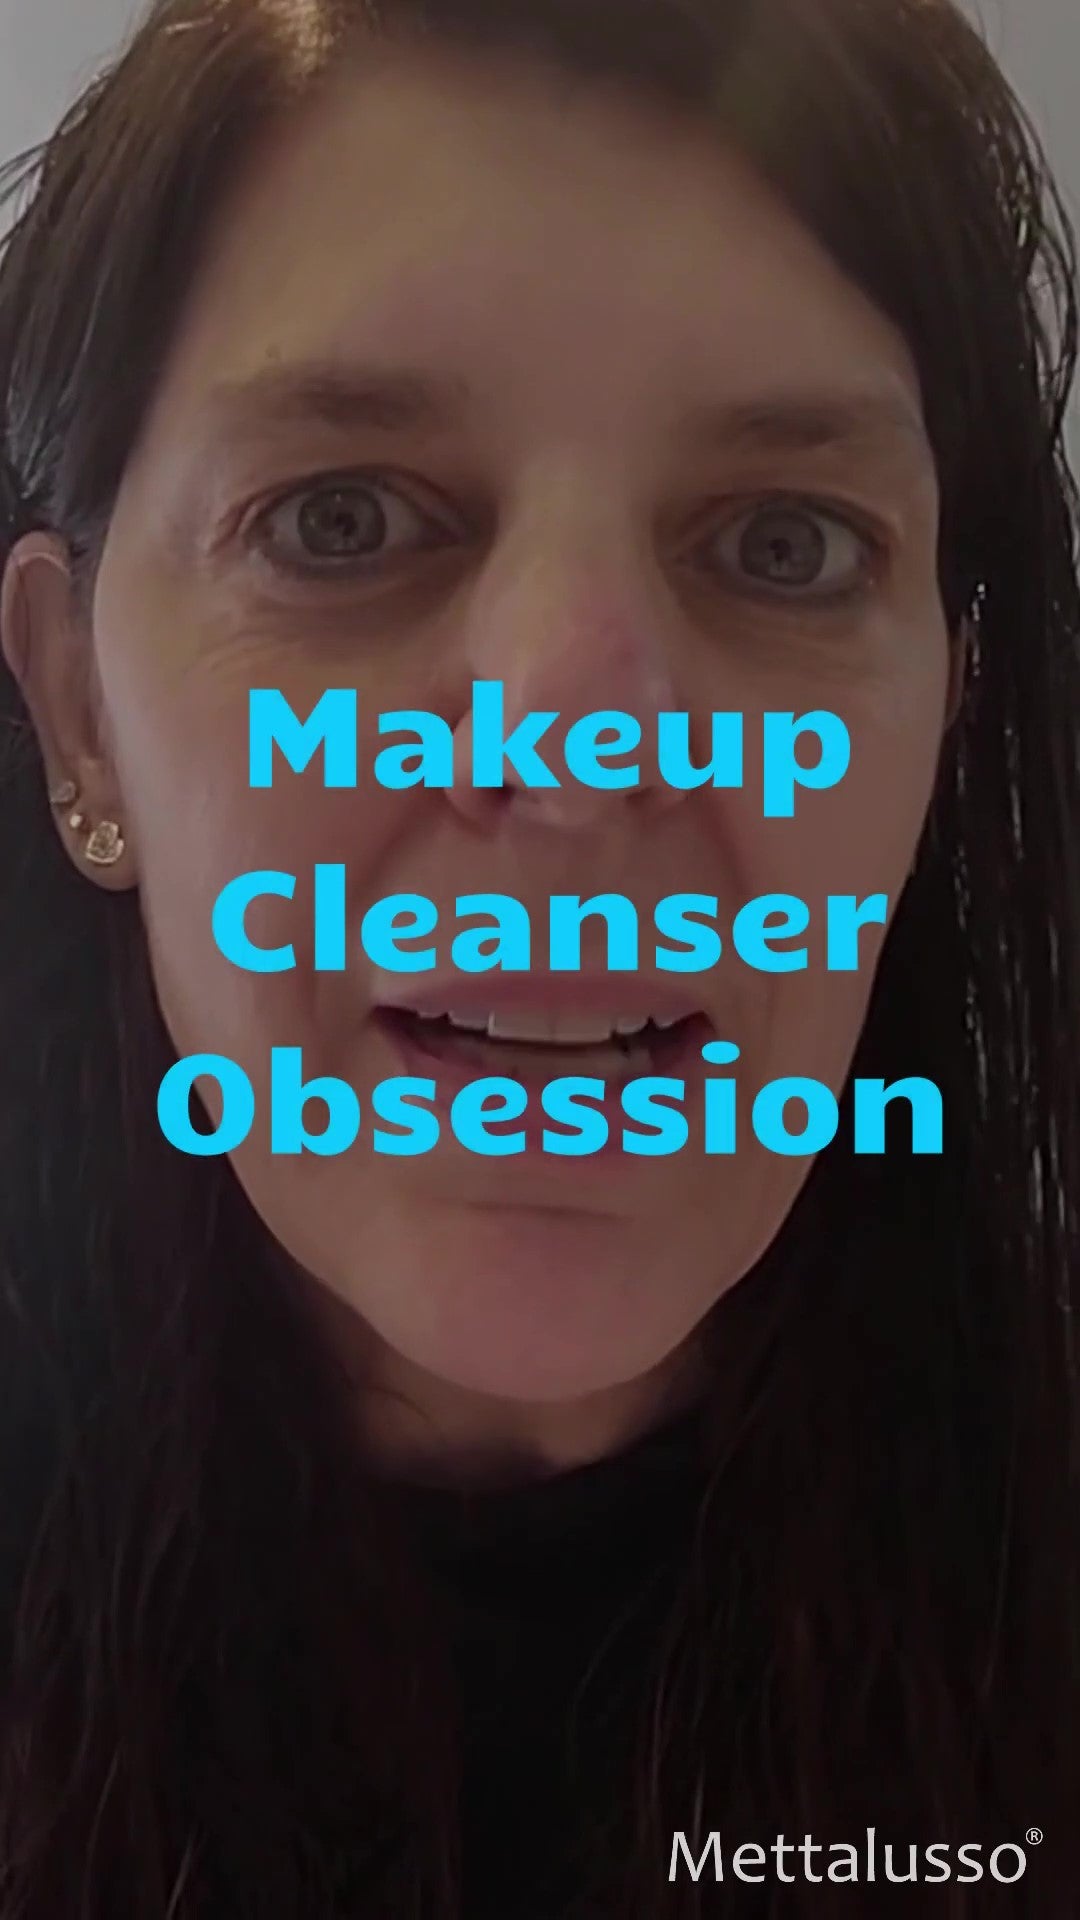 Christine C Oddo founder of Mettalusso explains her makeup cleanser obsession and why it needs to be oil free